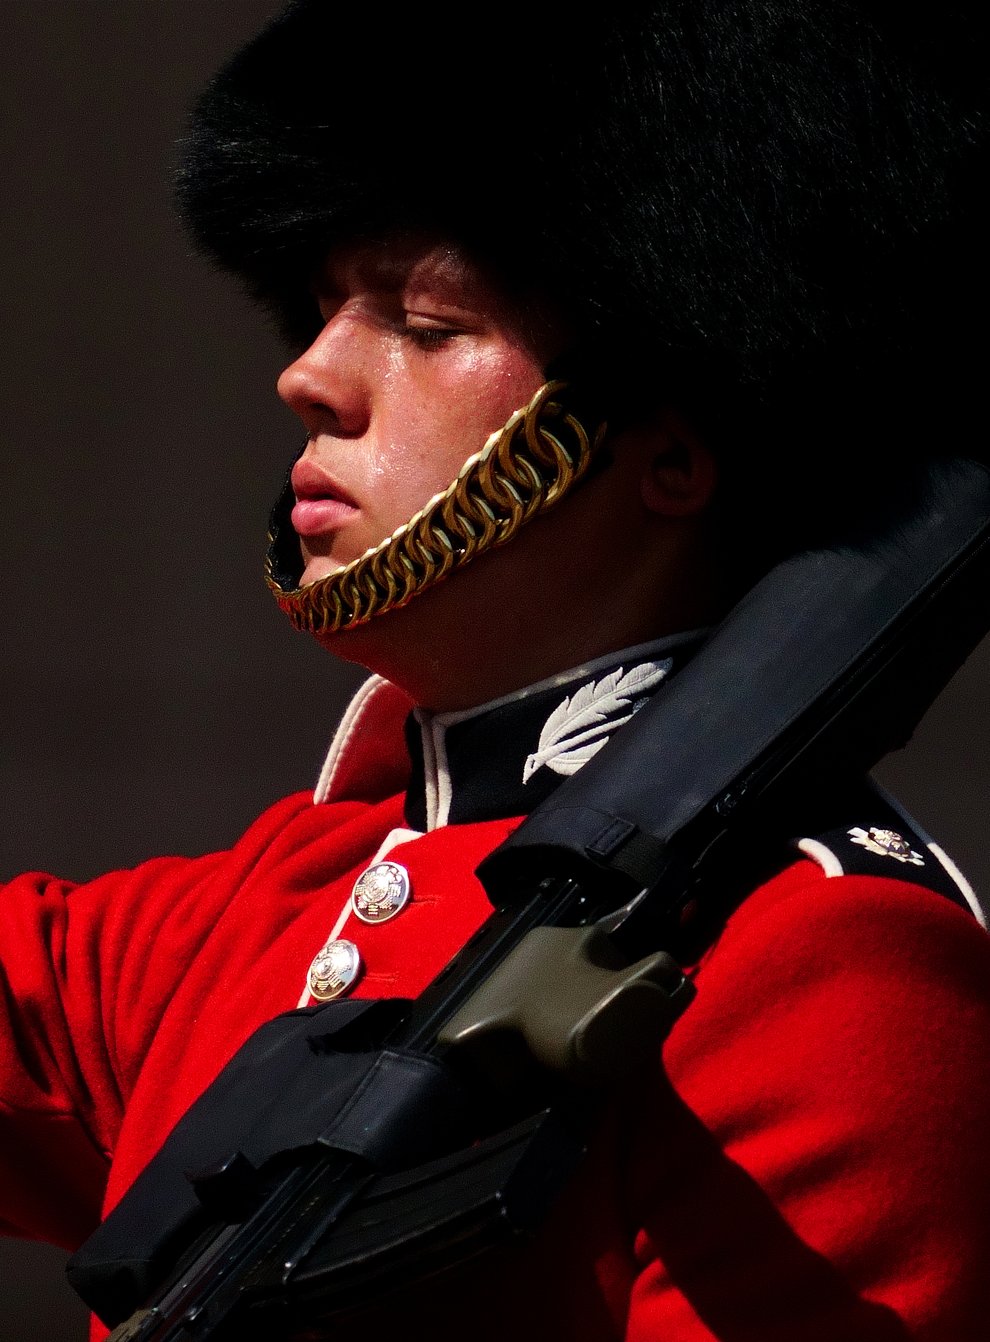 A member of F Company Scots Guards swelters in the heat during the Changing of the Guard ceremony on the forecourt of Buckingham Palace (Victoria Jones/PA)